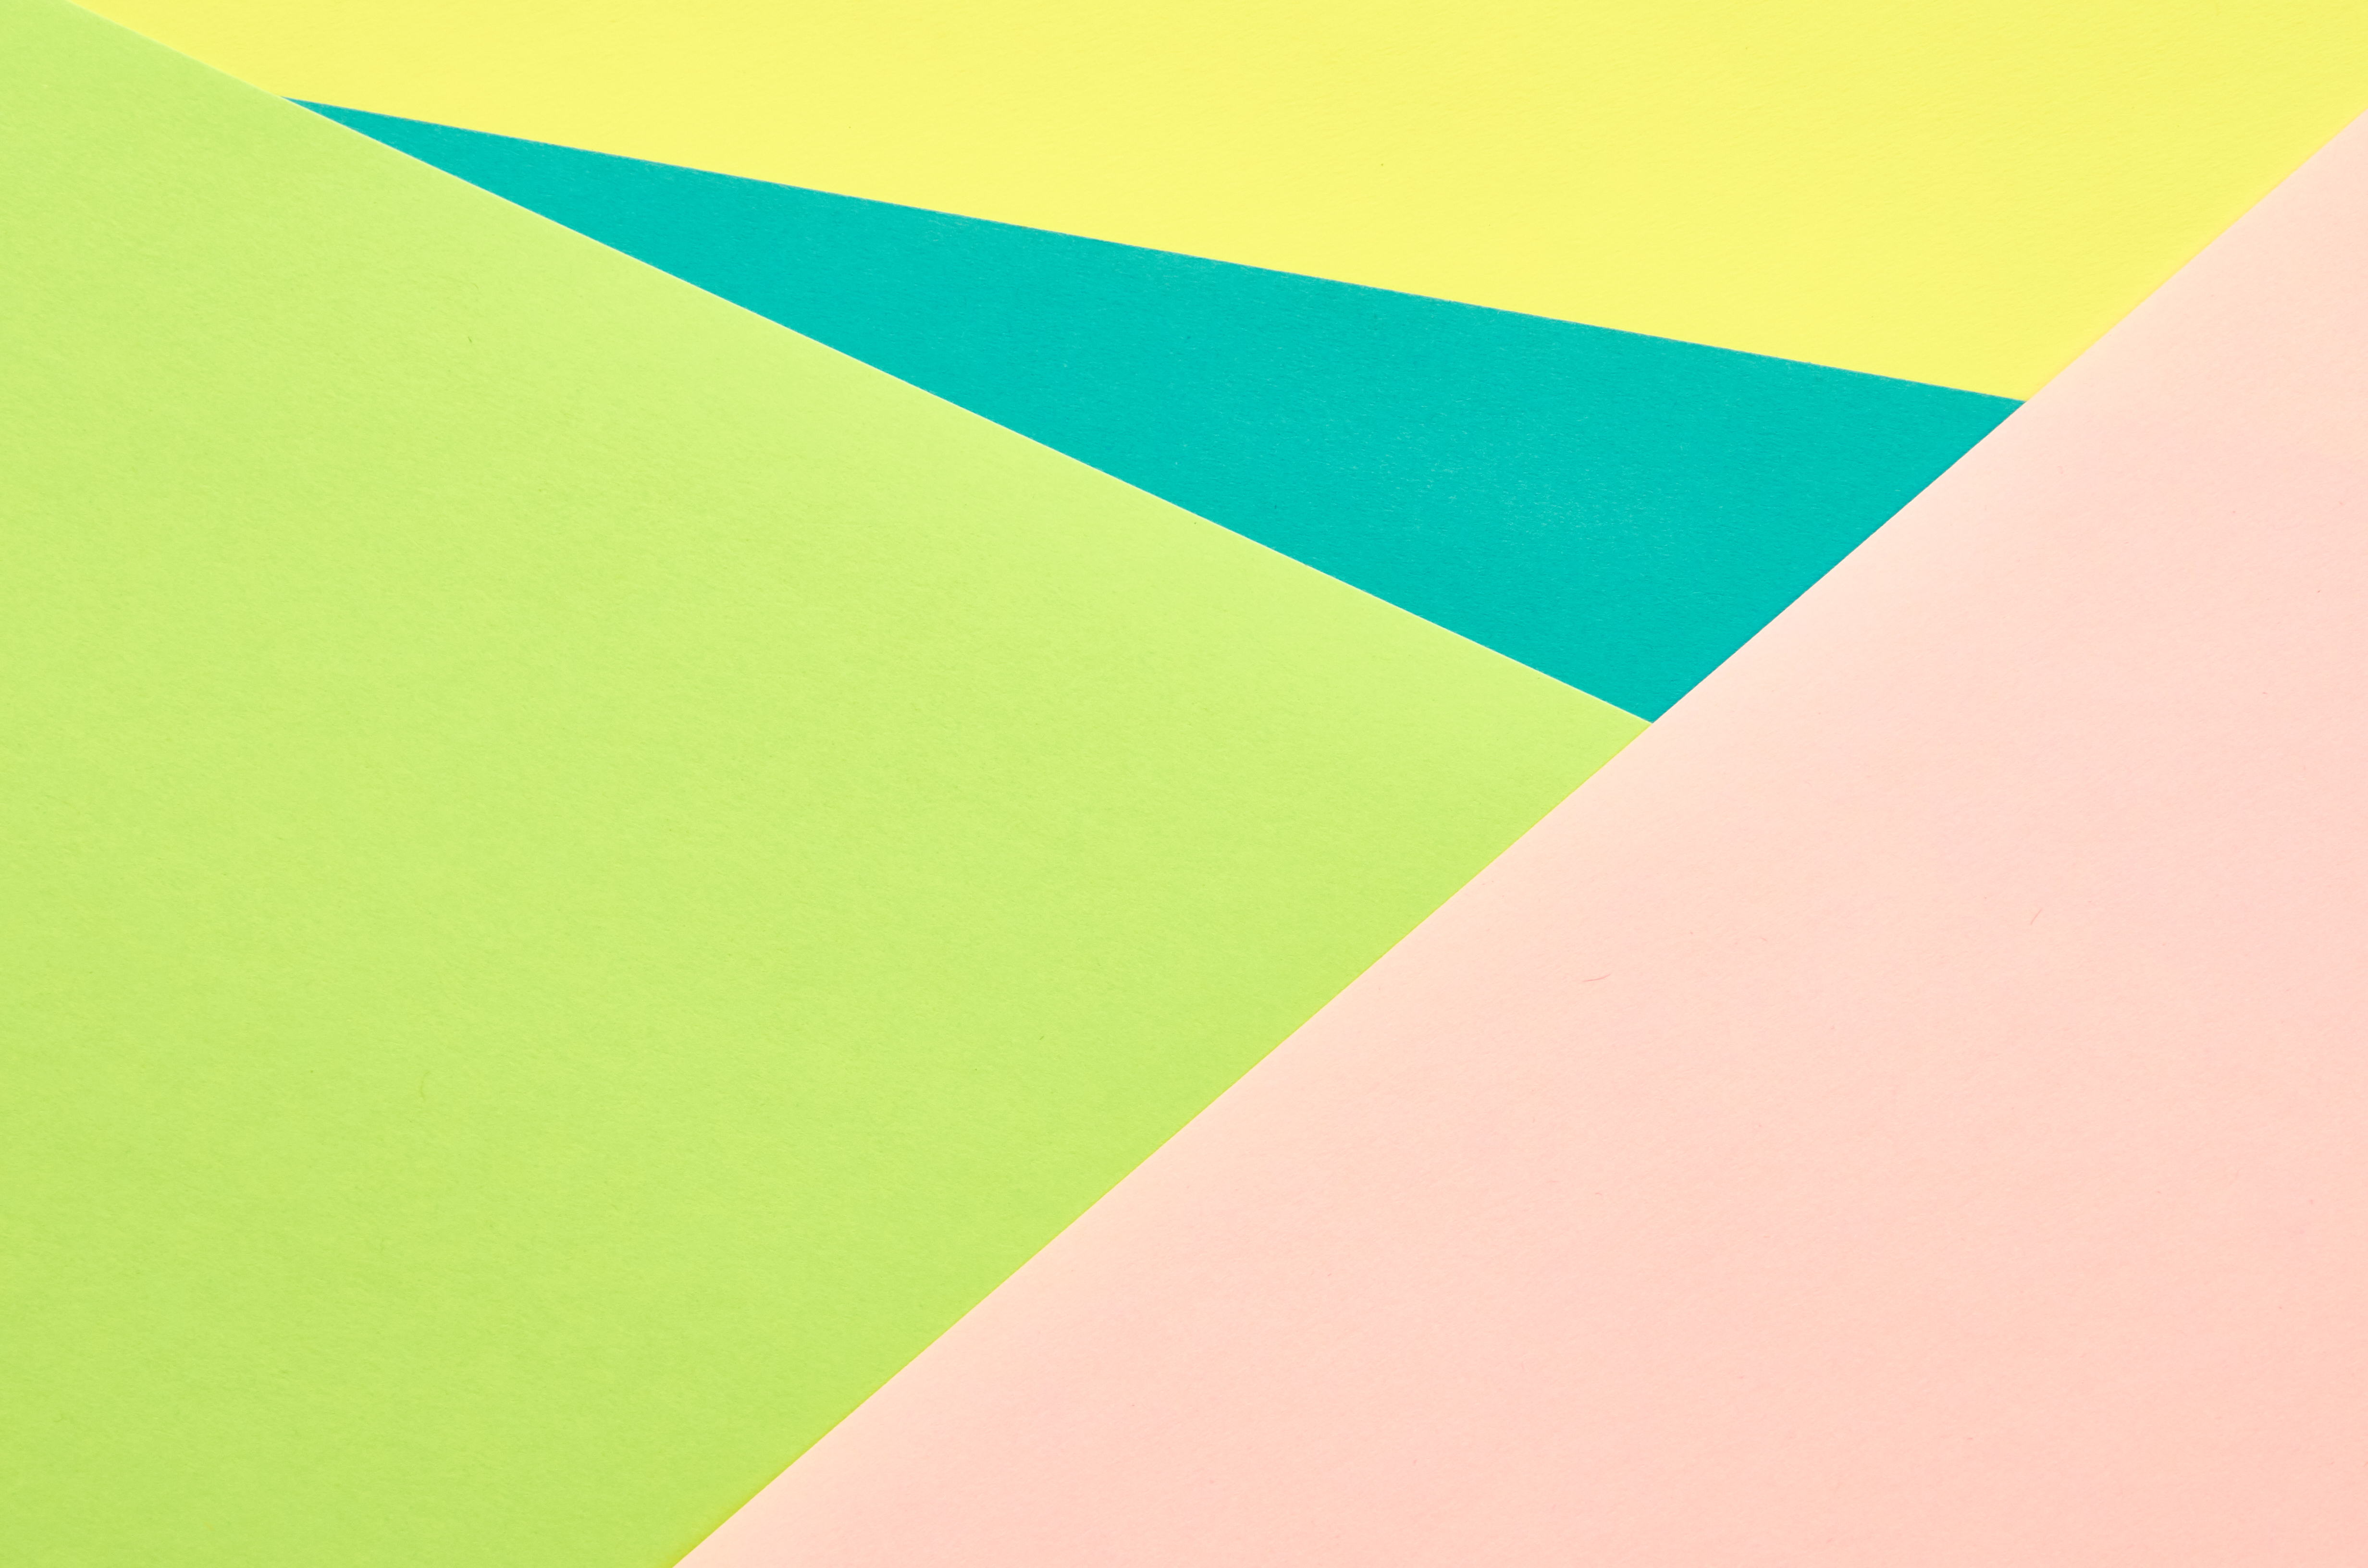 motley, multicolored, abstract, shape, shapes, triangles, fragments UHD